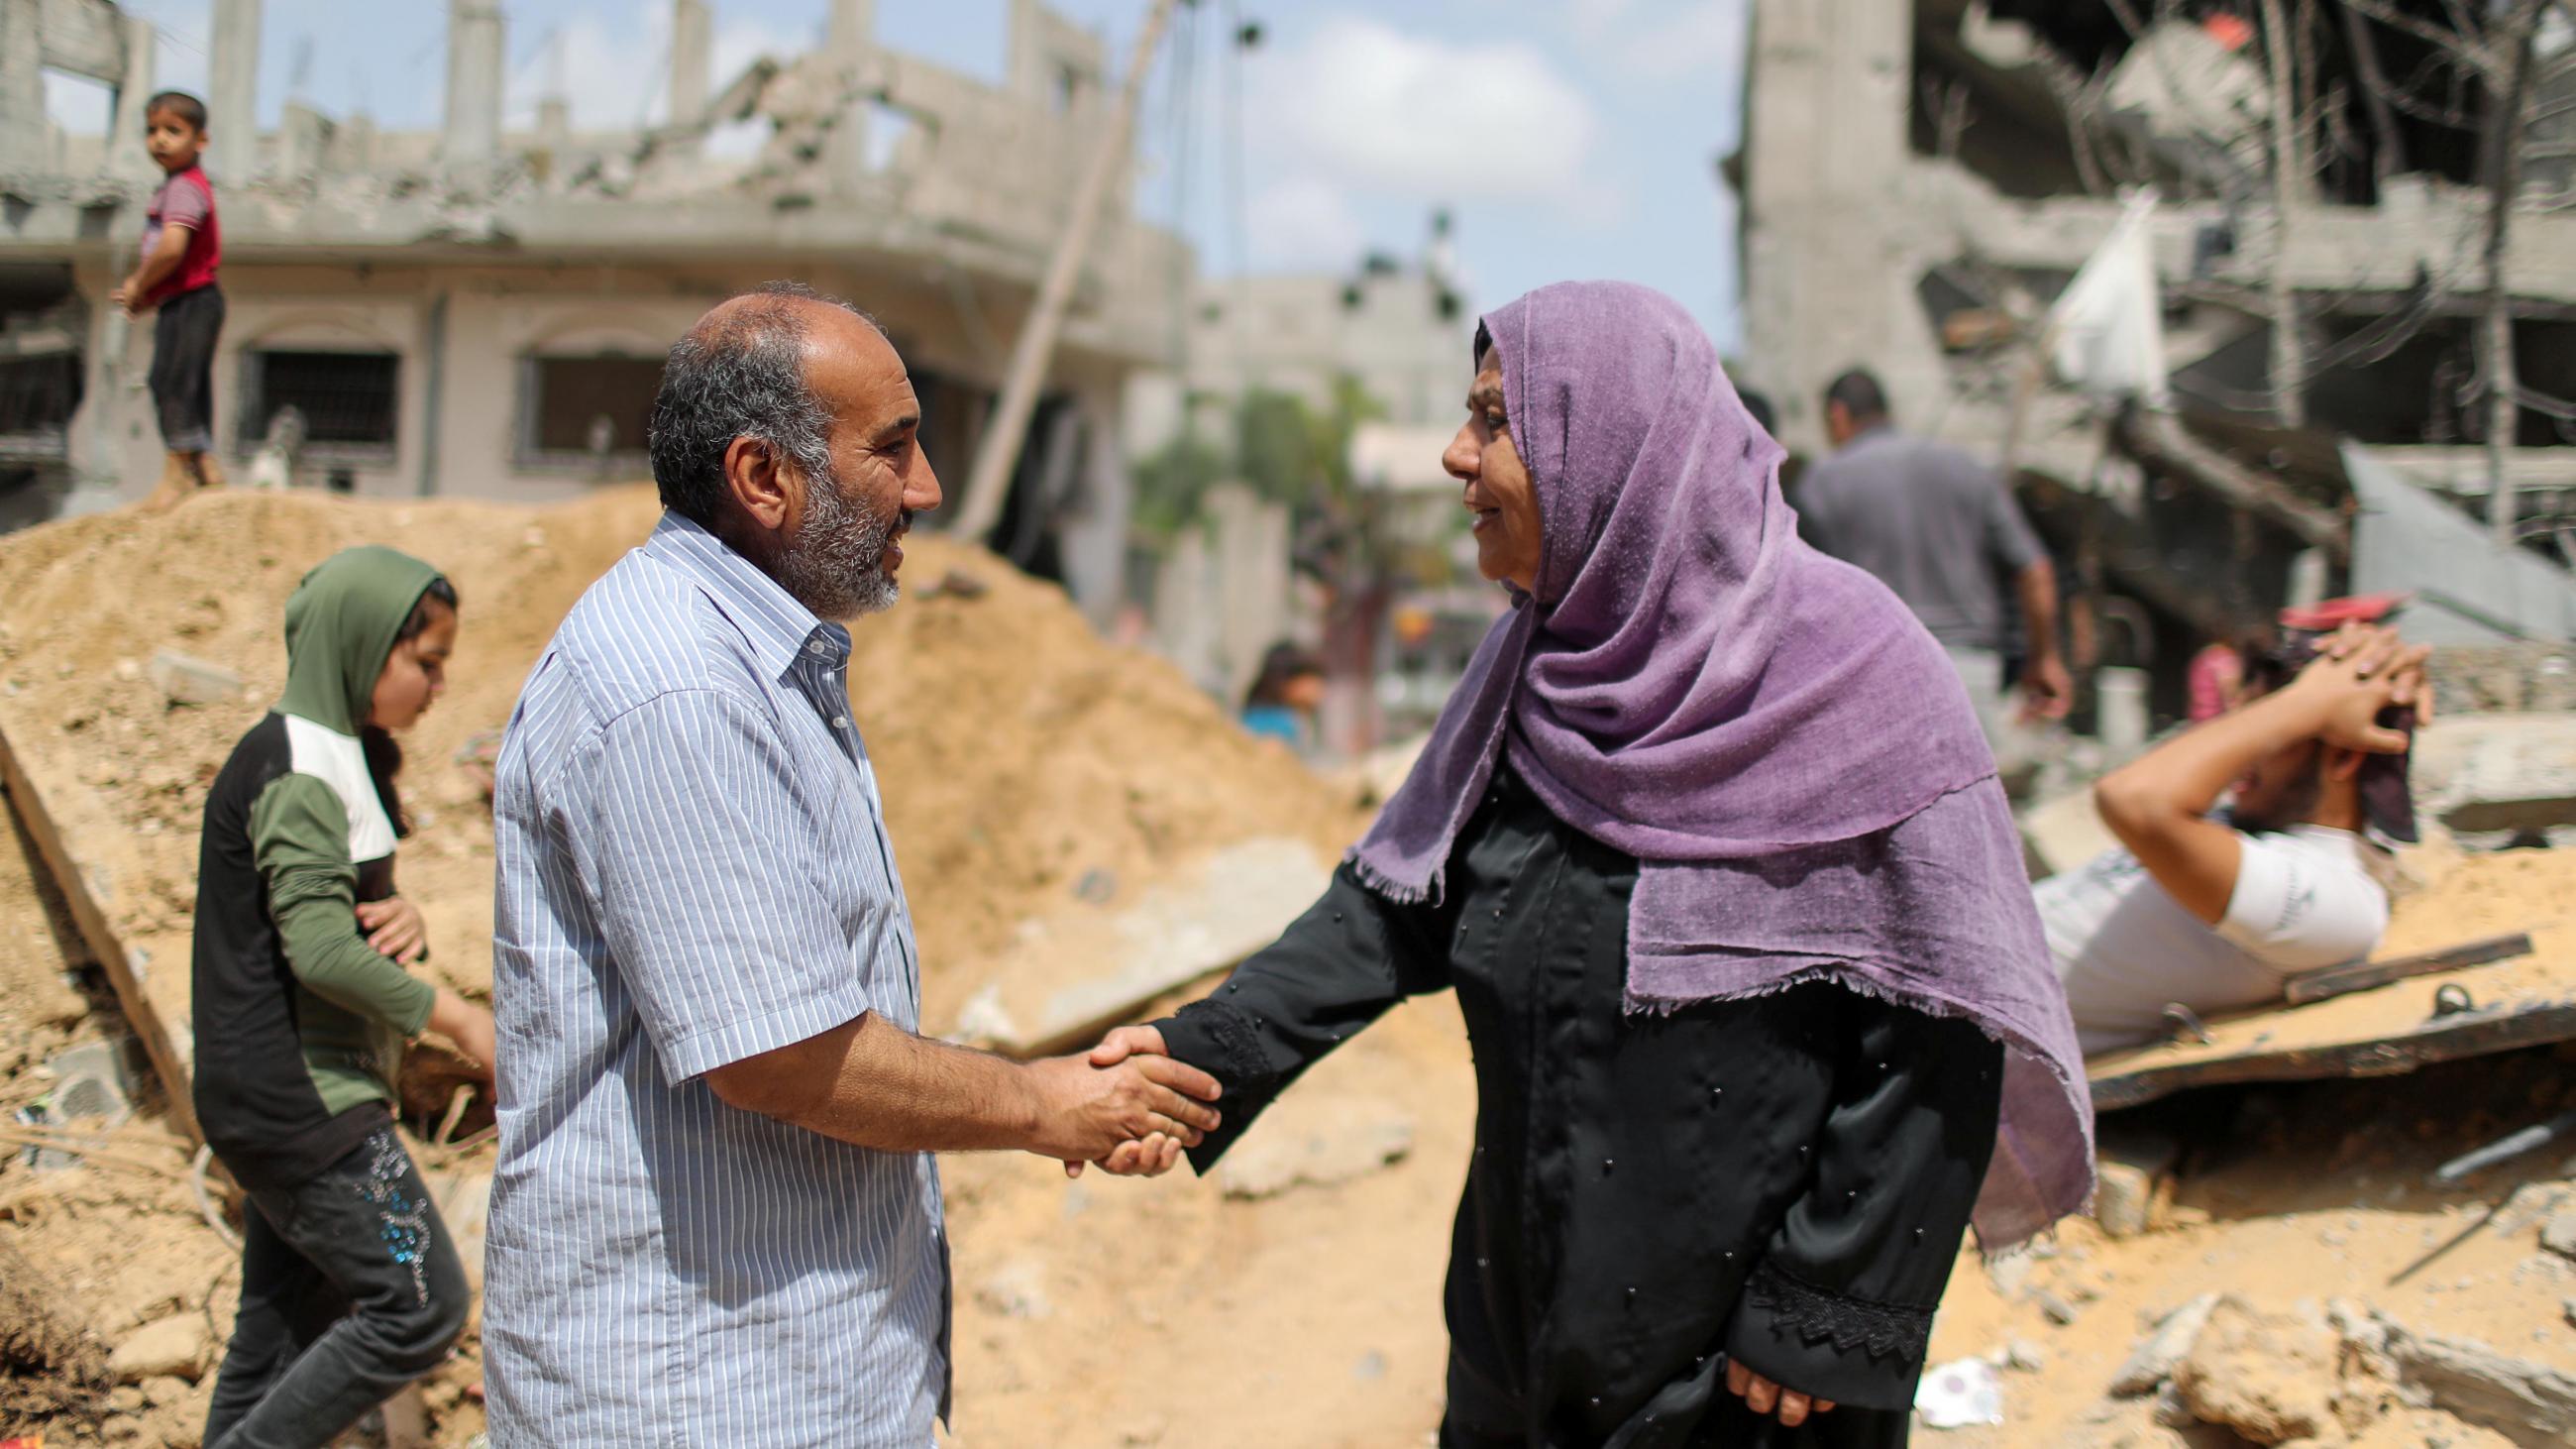 A Palestinian man and a Palestinian woman from shake hands after returning to their destroyed houses following an Israel-Hamas truce, in Beit Hanoun in the northern Gaza Strip on May 21, 2021. REUTERS/Mohammed Salem